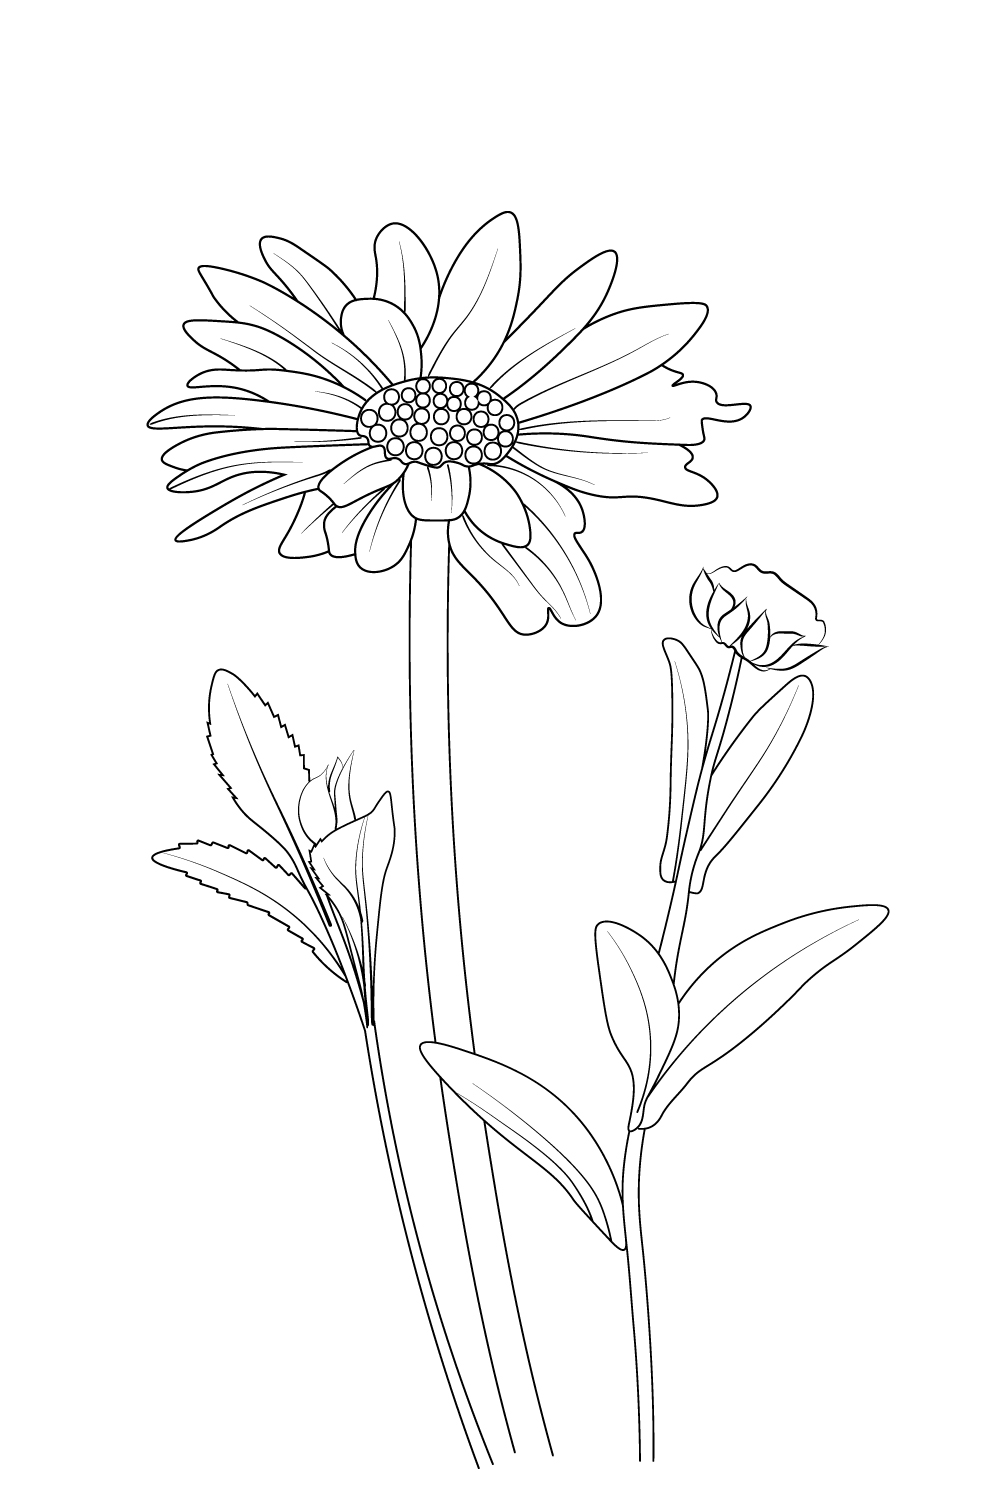 simple daisy flower drawing for kids, daisy flower line art, easy way to draw a daisy flower, pinterest preview image.